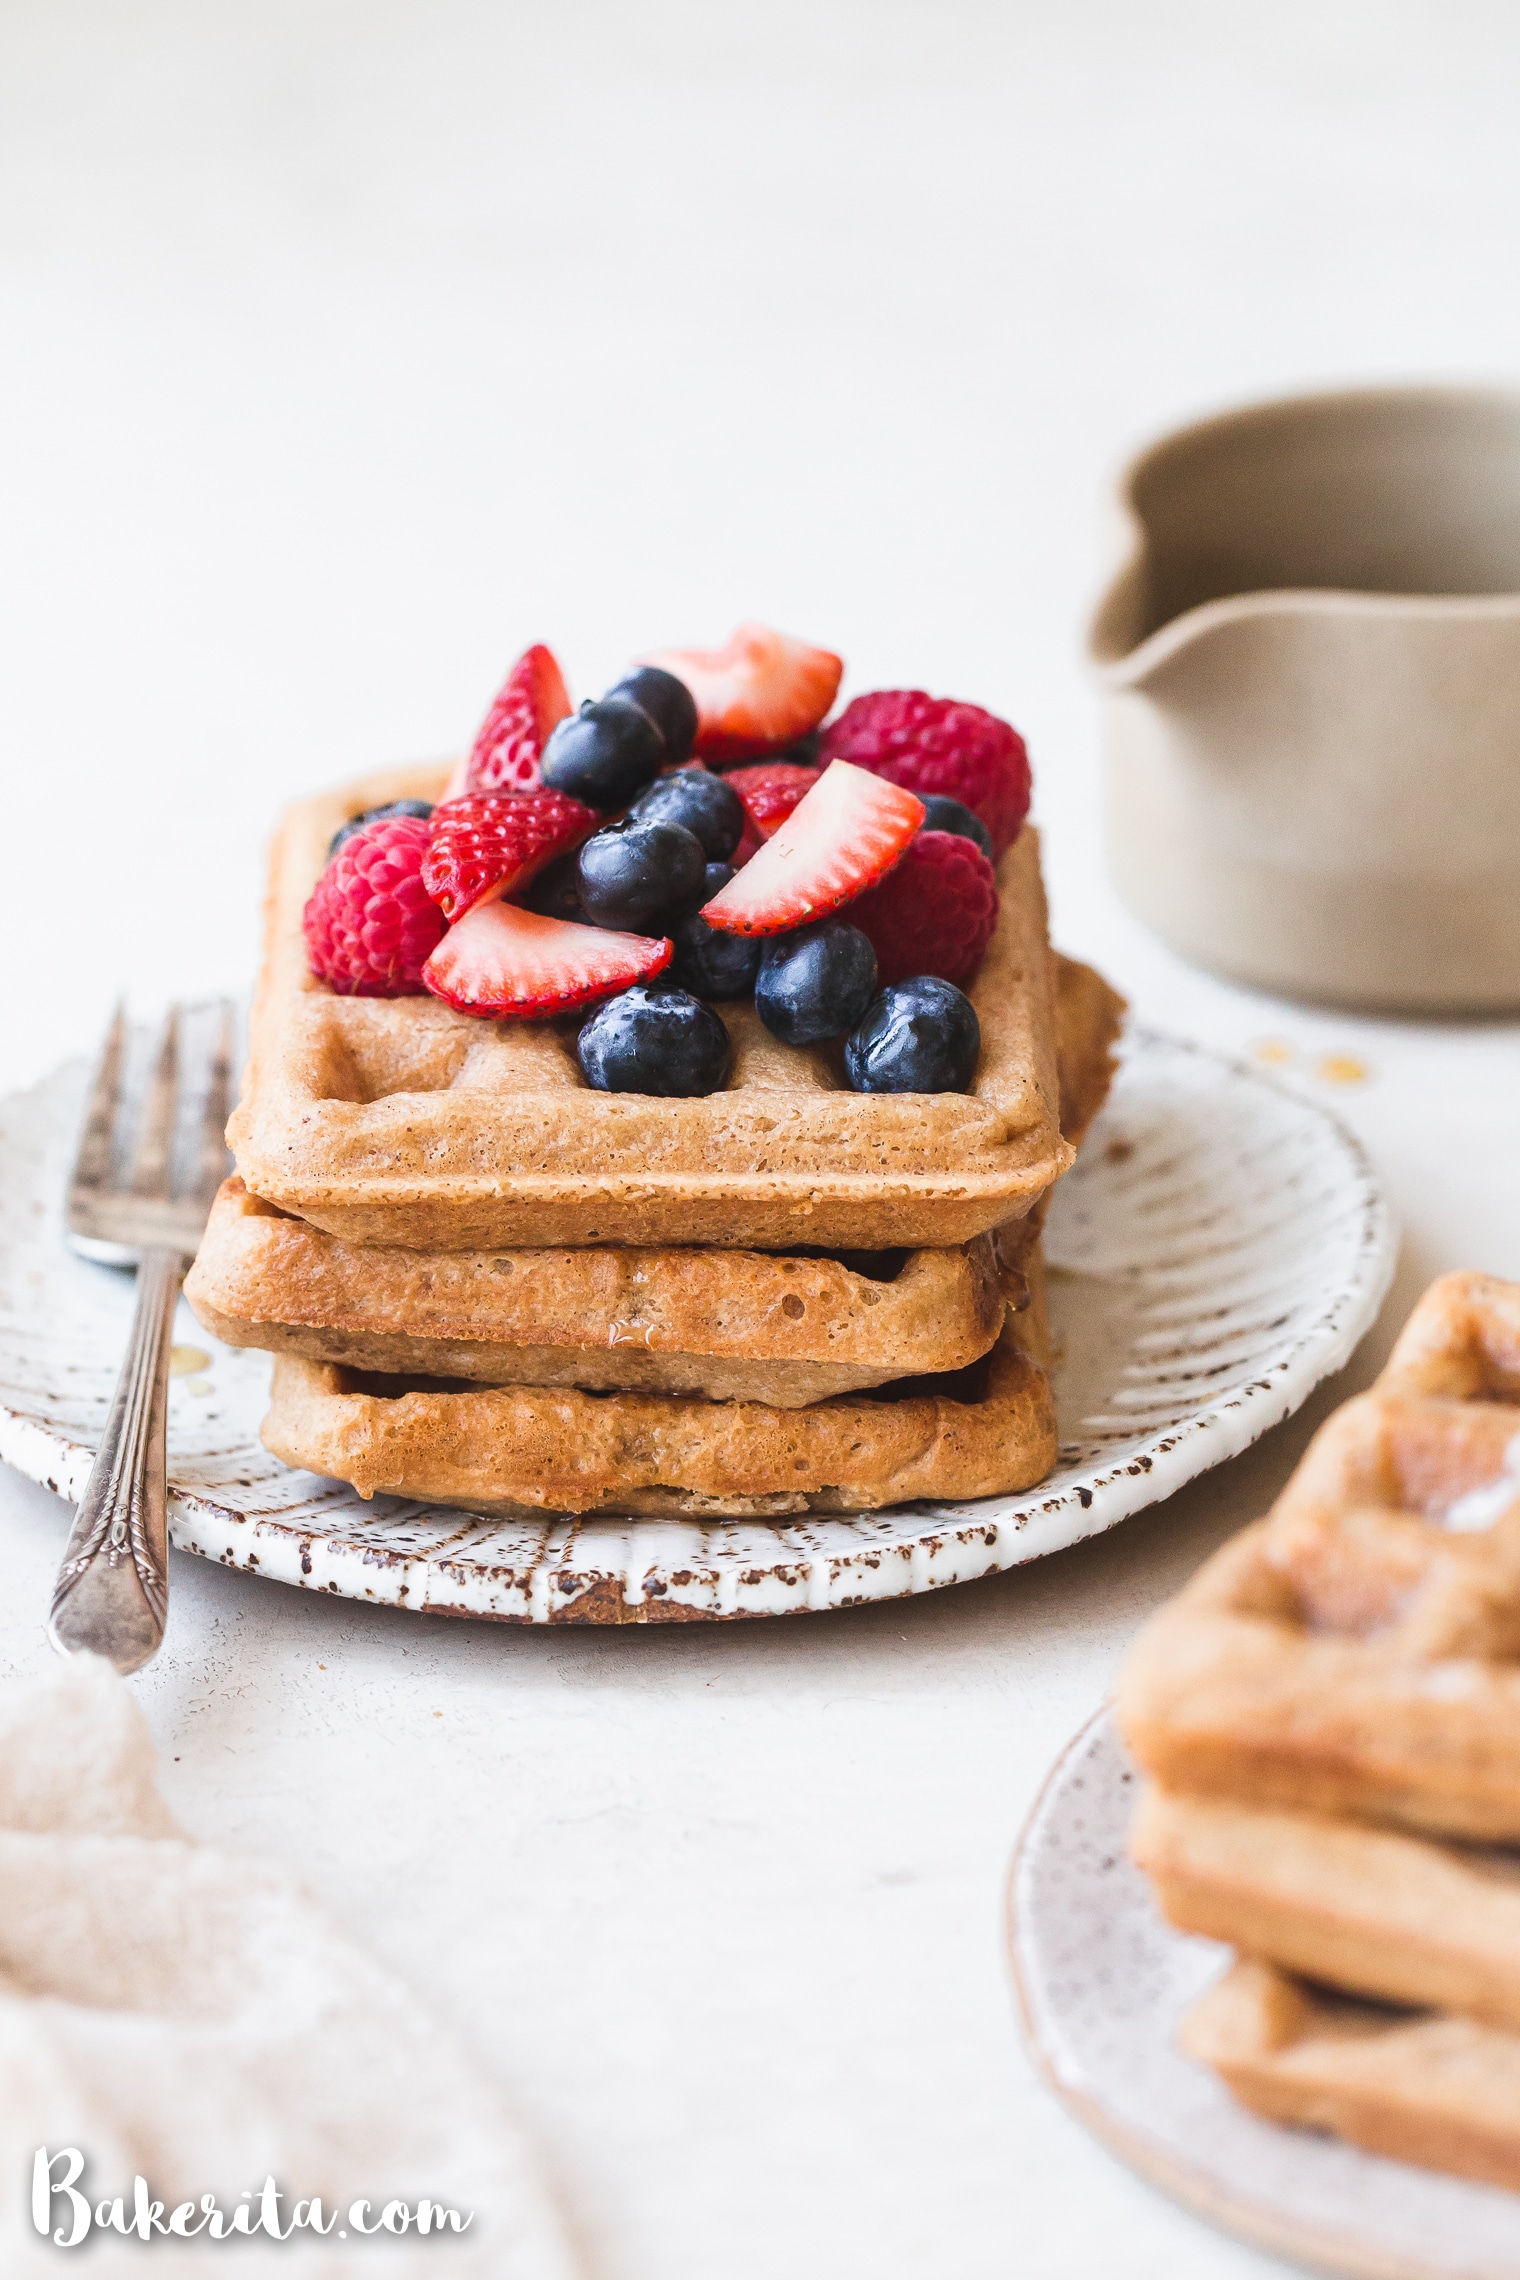 These Paleo Vegan Waffles are incredibly light, crispy, and best of all - easy to make! They're gluten-free, egg-free, and can easily be frozen for a quick breakfast.